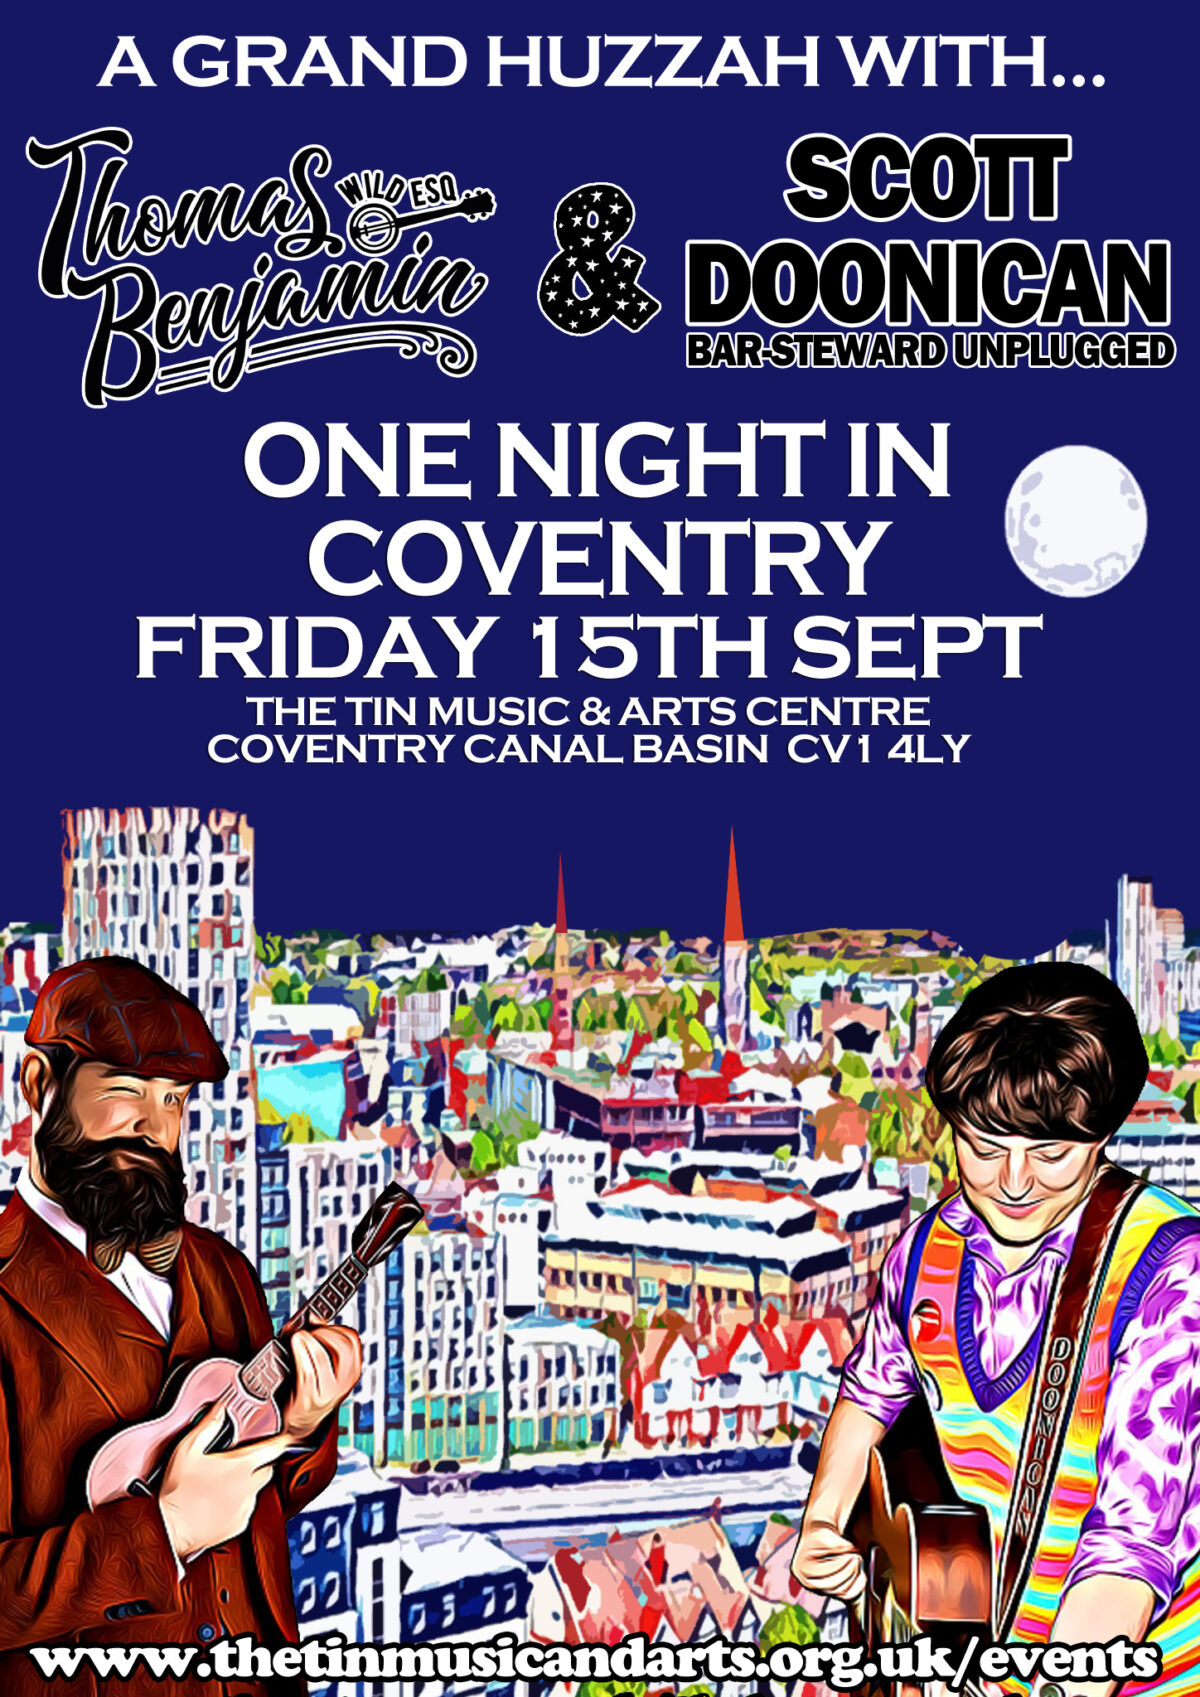 Poster for A Grand Huzzah with Thomas Benjamin Wild Esq. and Scott Doonican (Bar Steward Unplugged) on Friday 15th September at The Tin Music and Arts. Stylised images of both artists are imposed on top of an artist's impression of Coventry.